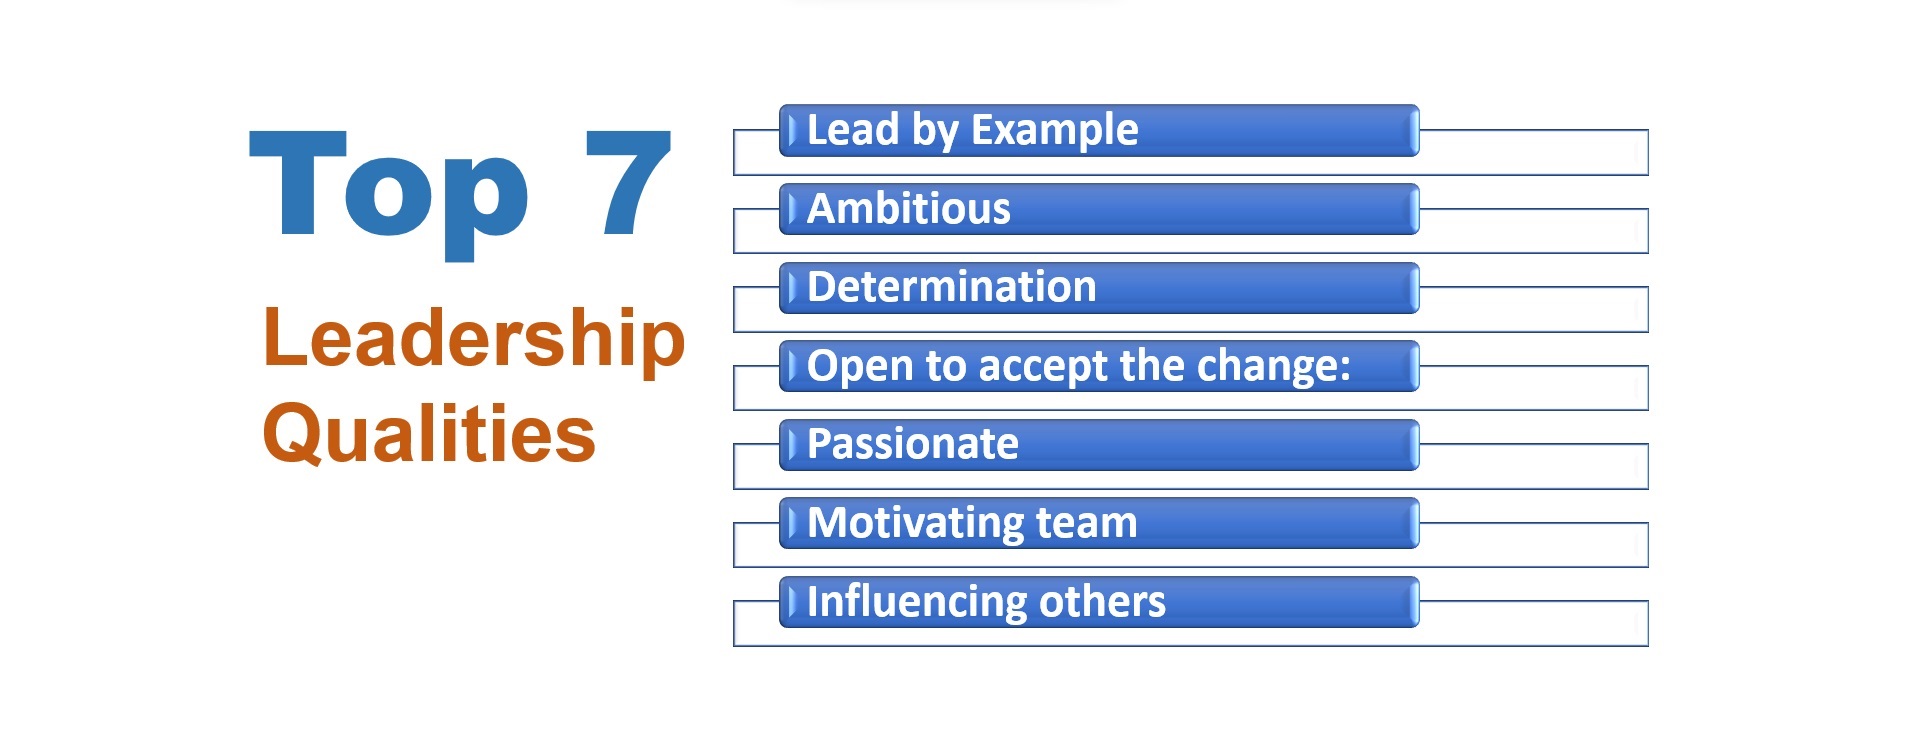 Leadership Qualities : Mastering Success Through Example, Ambition, and Influence